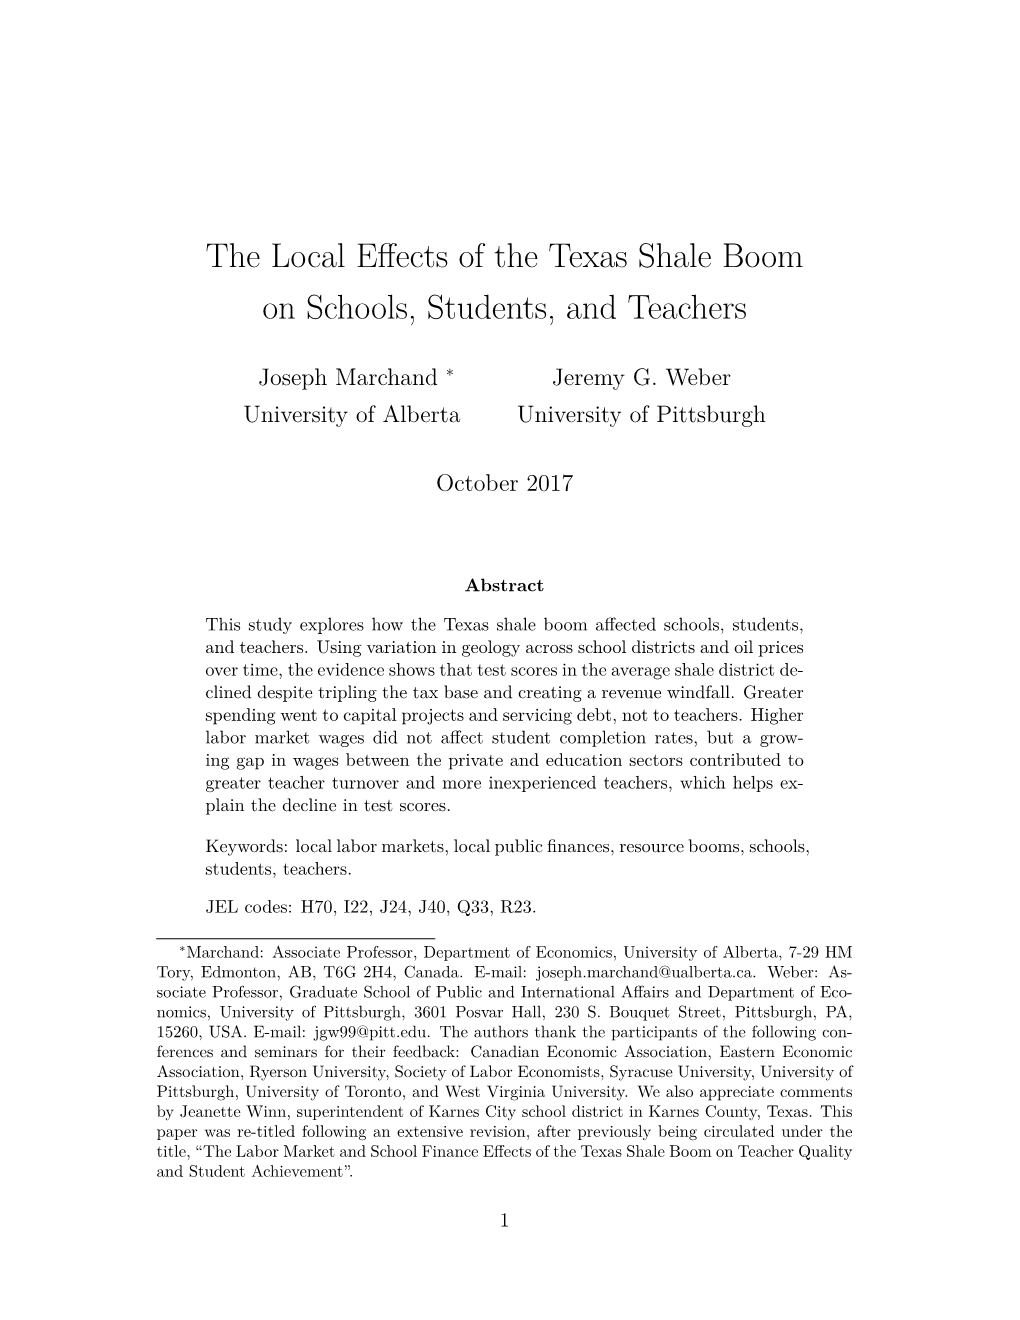 The Local Effects of the Texas Shale Boom on Schools, Students, and Teachers